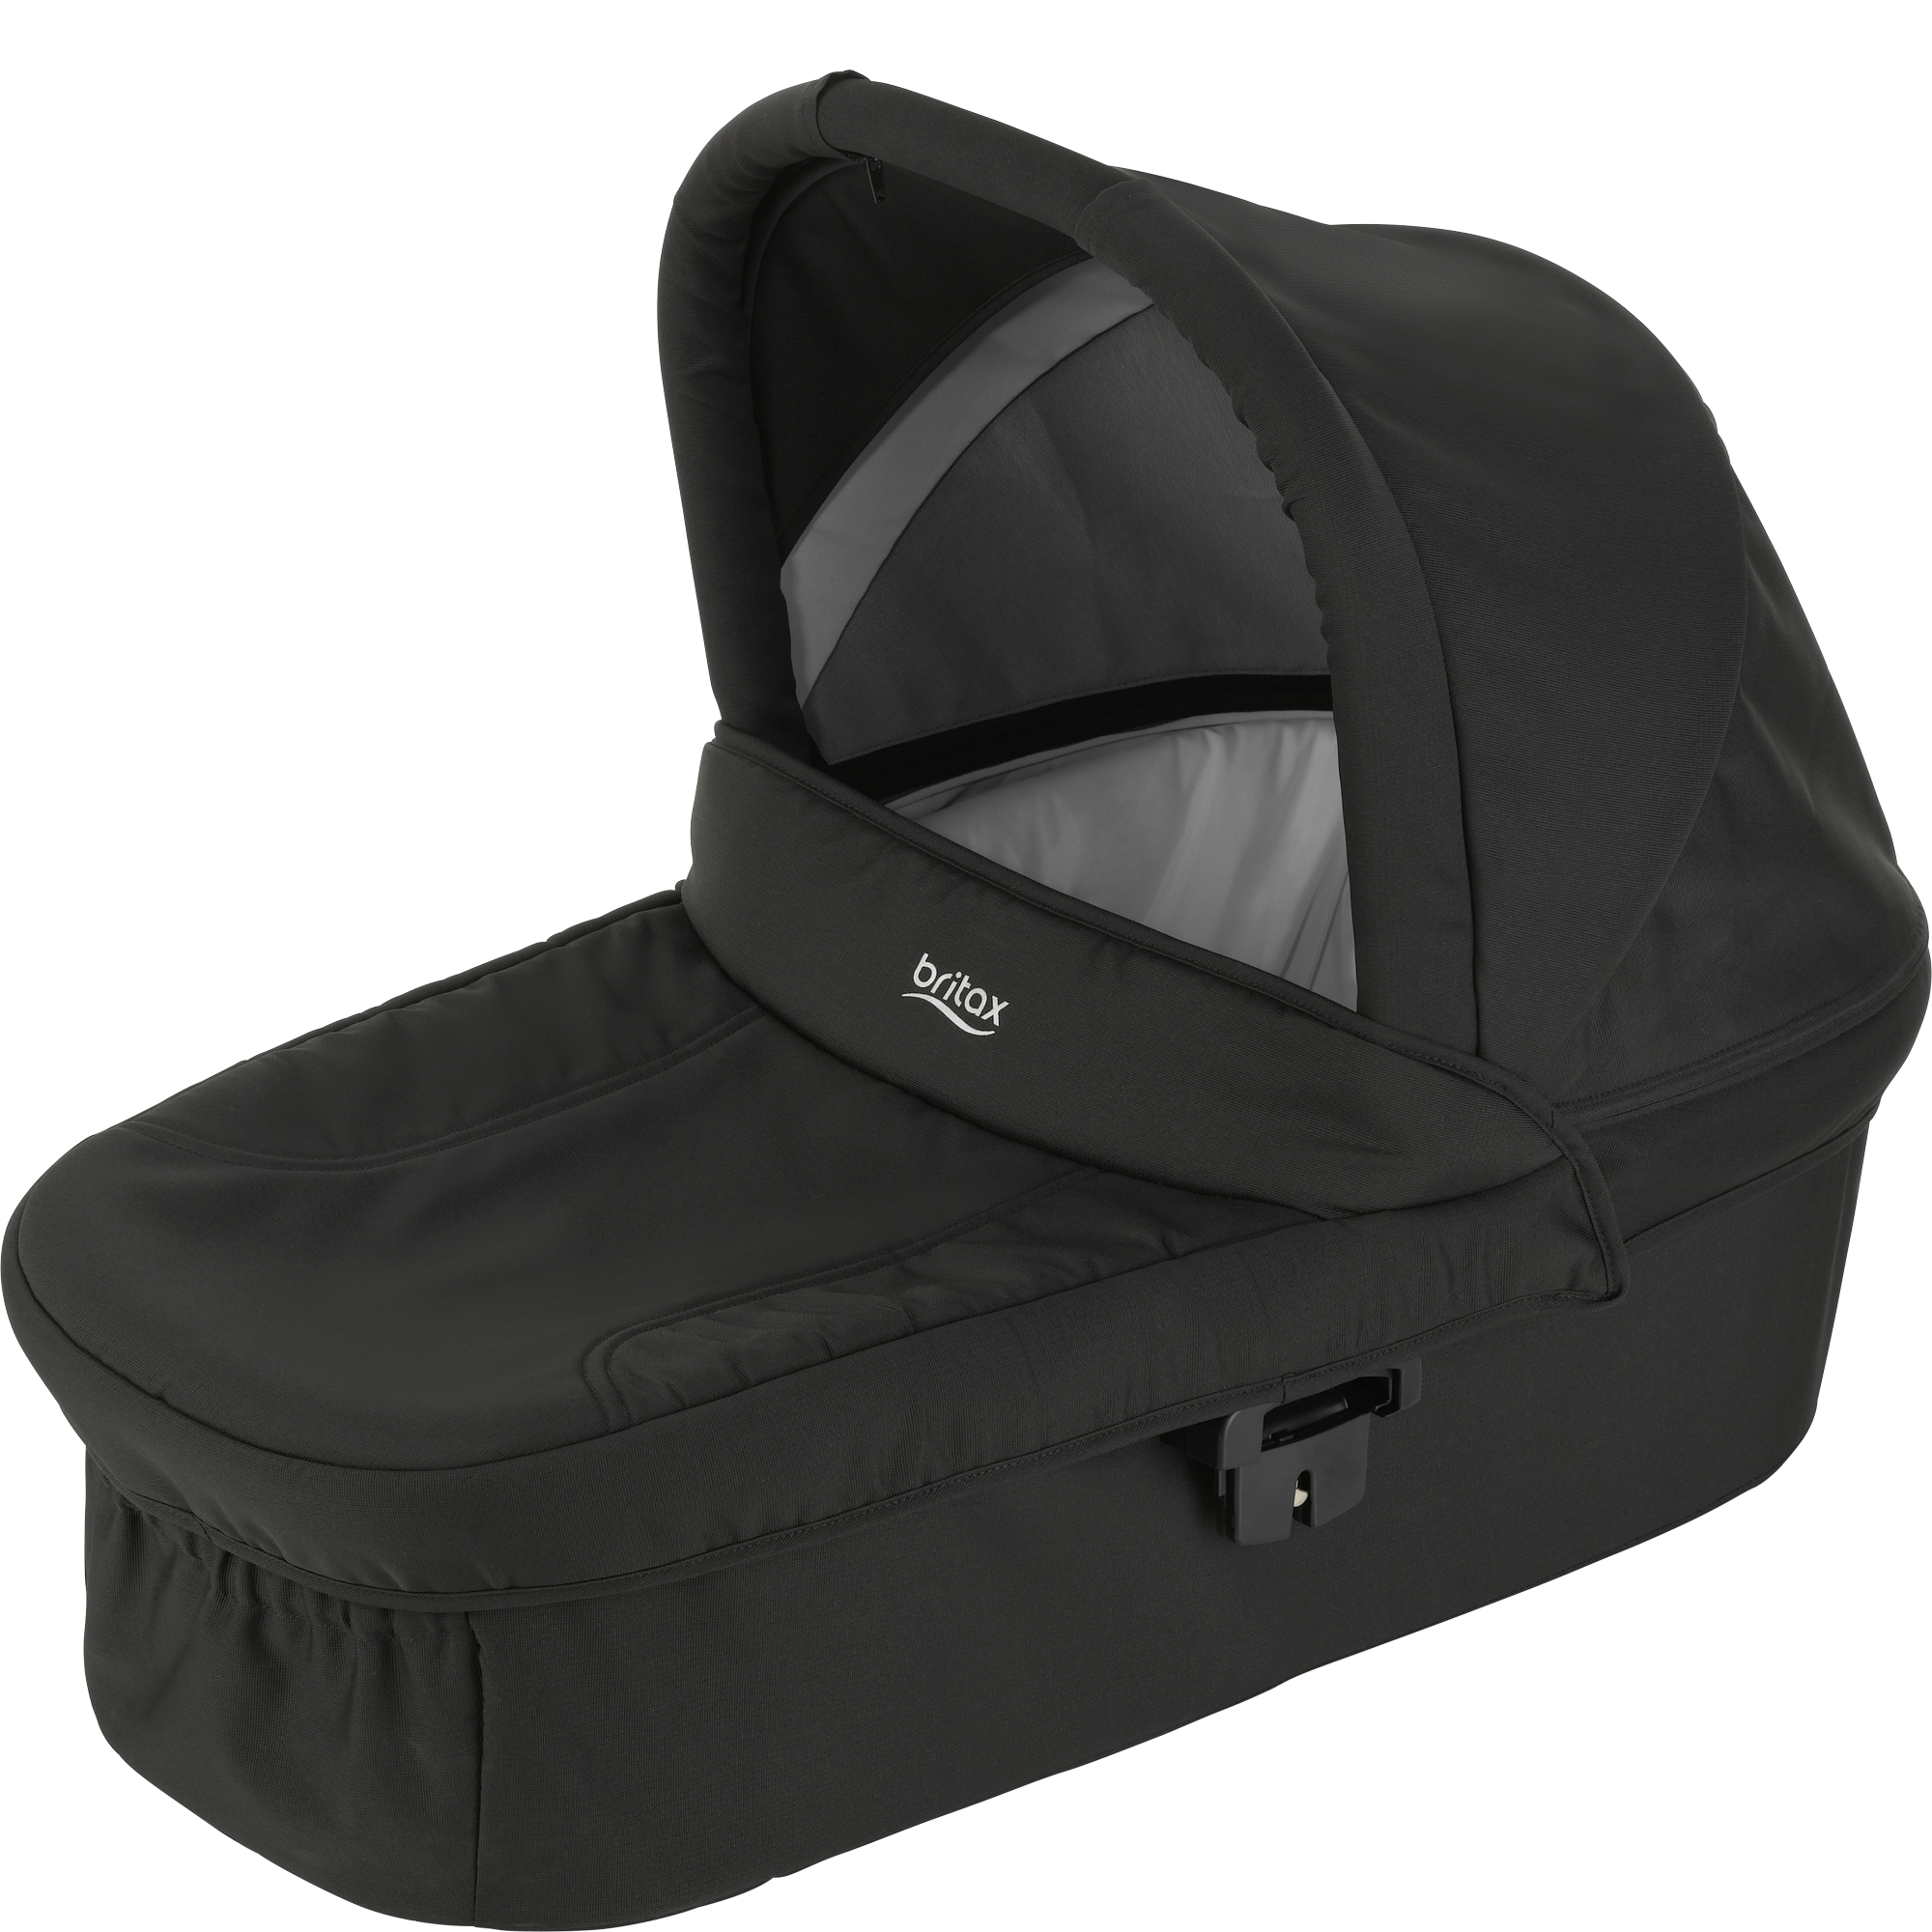 britax affinity carrycot